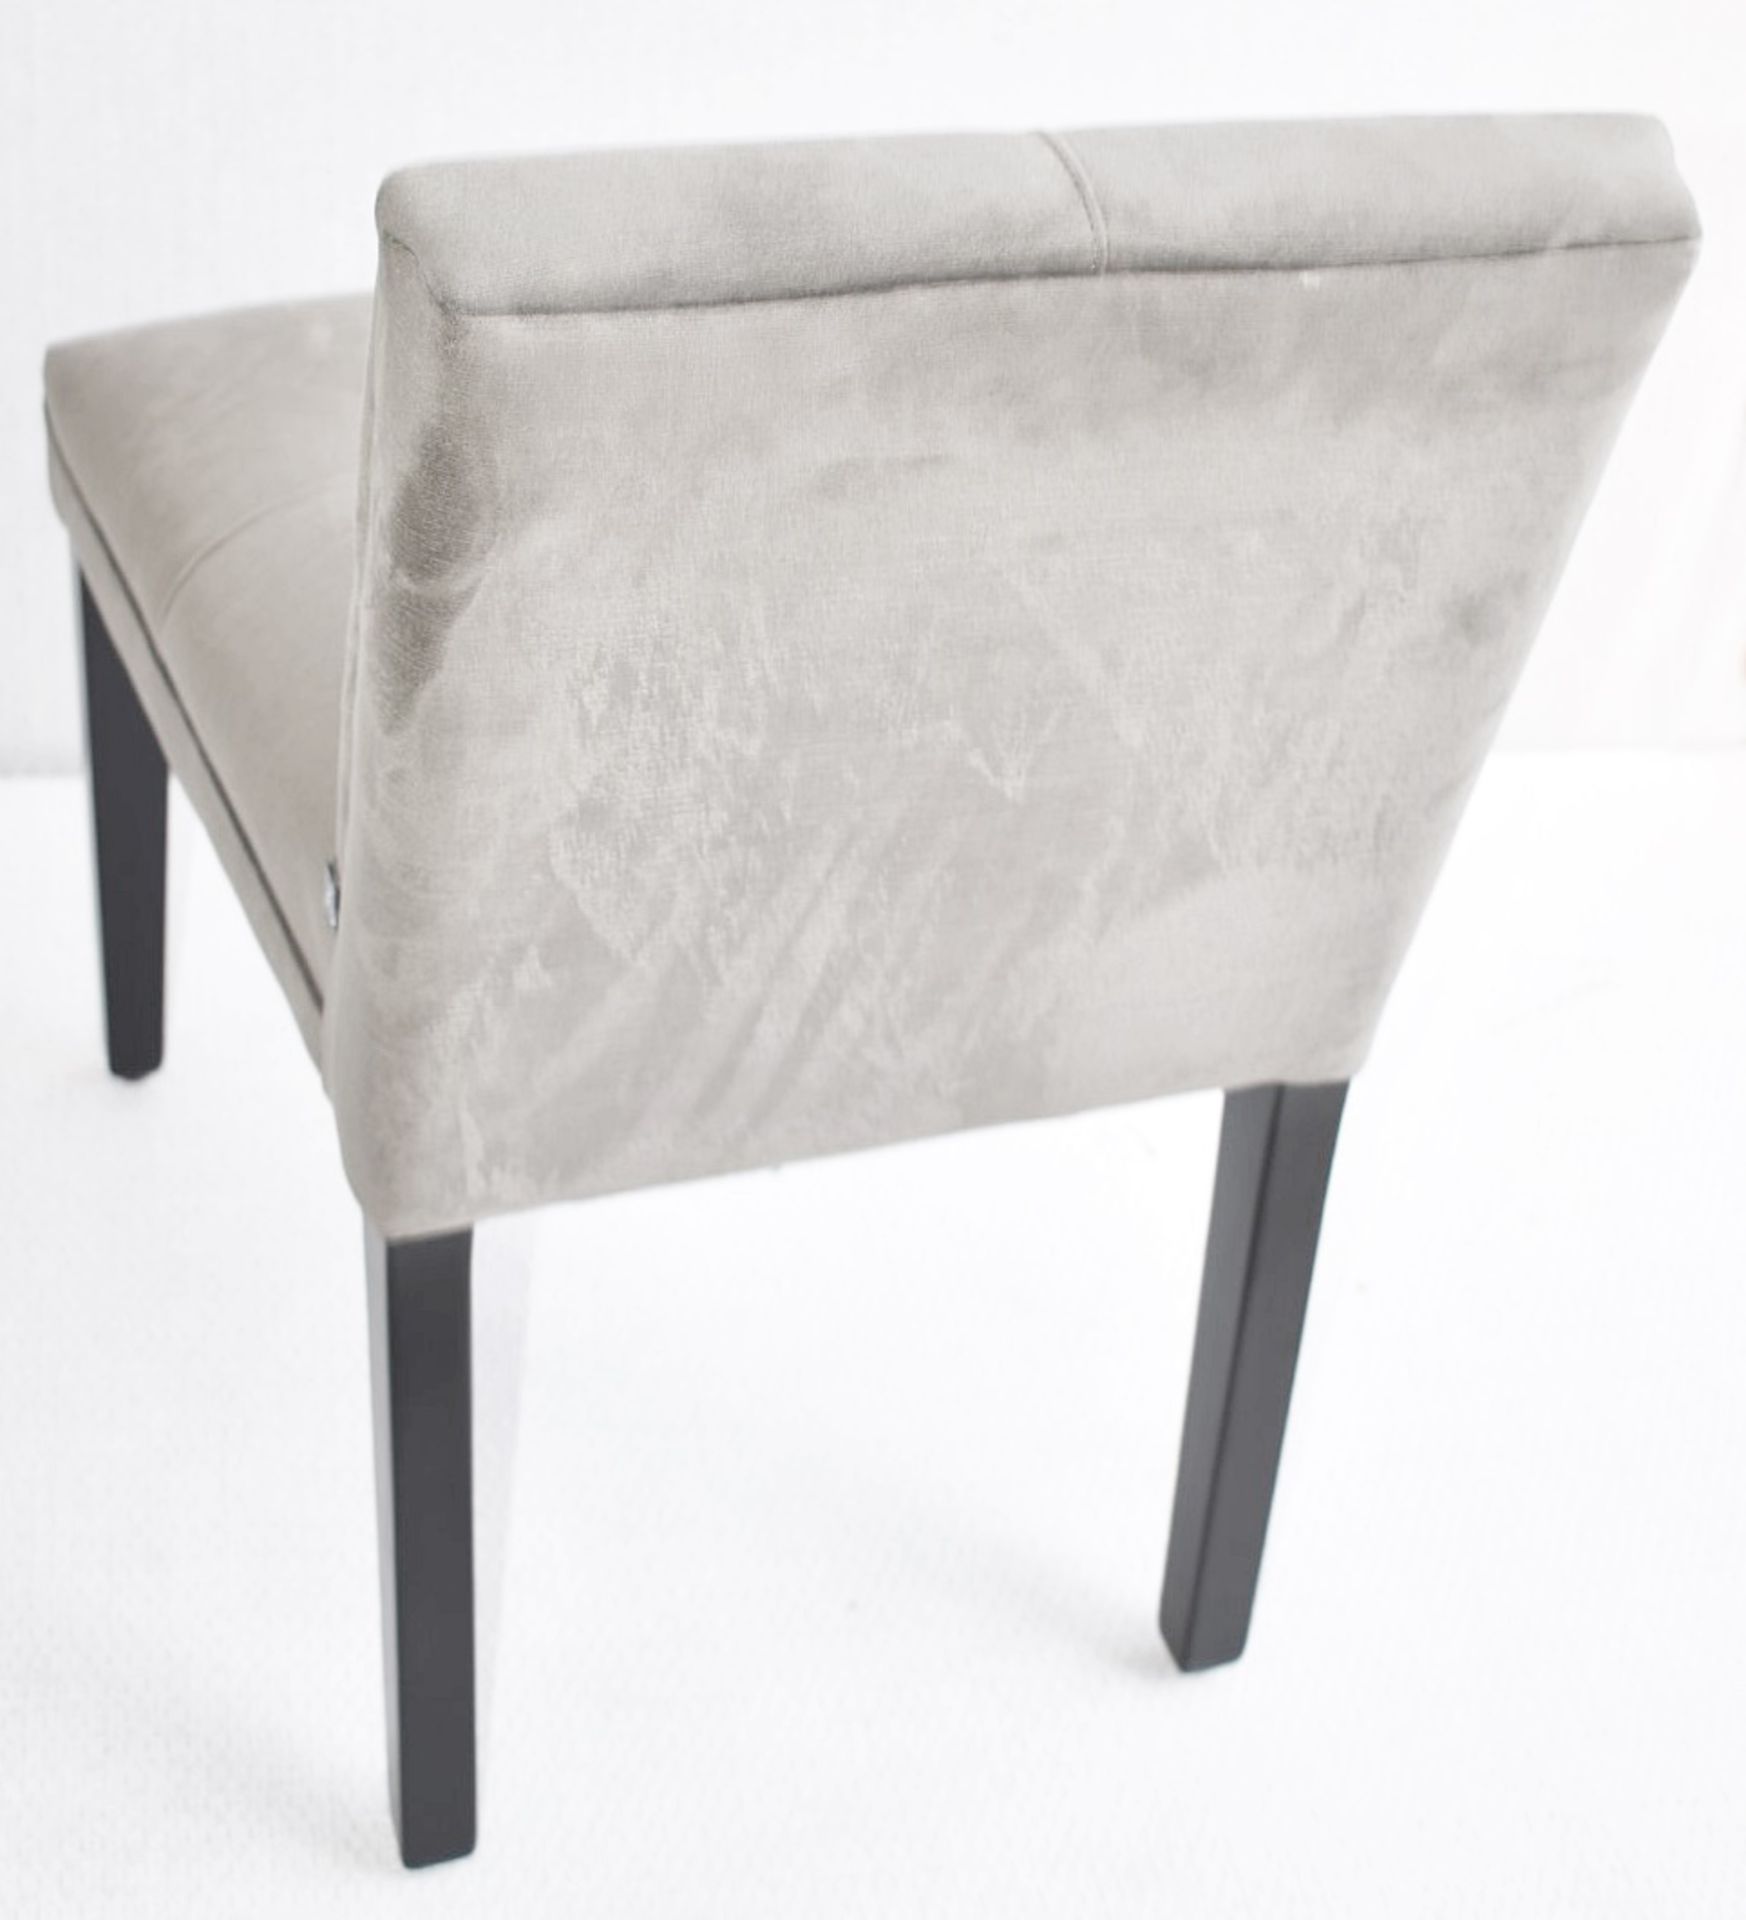 A Pair Of EICHHOLTZ 'Cesare' Luxury Button-back Dining Chairs in Granite Grey - Original RRP £1,160 - Image 10 of 10